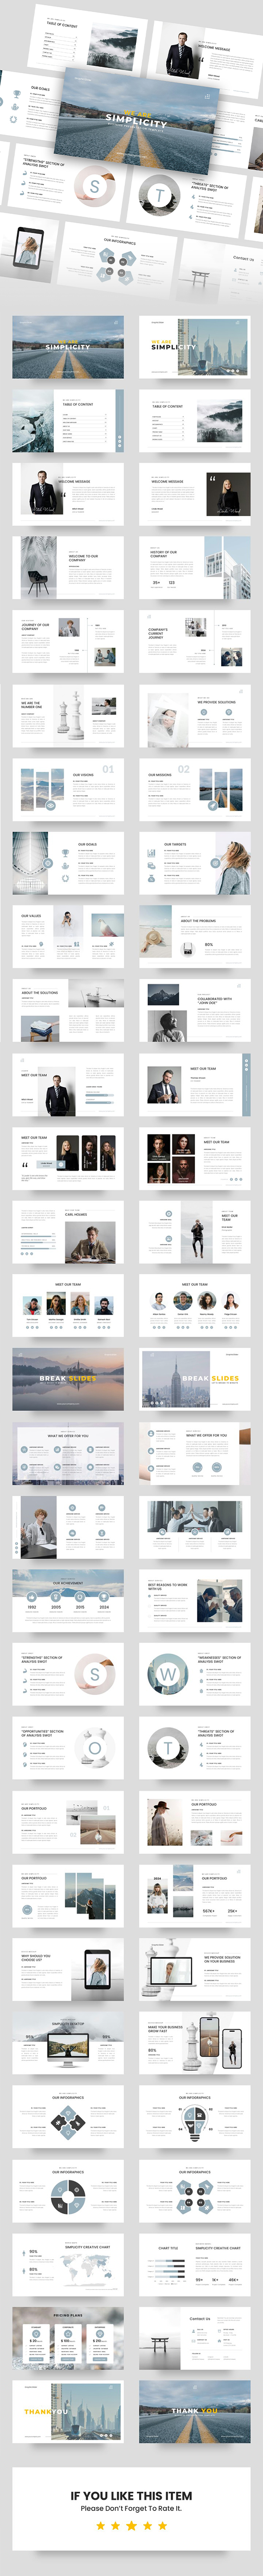 [DOWNLOAD]Simplicity – Business PowerPoint Template